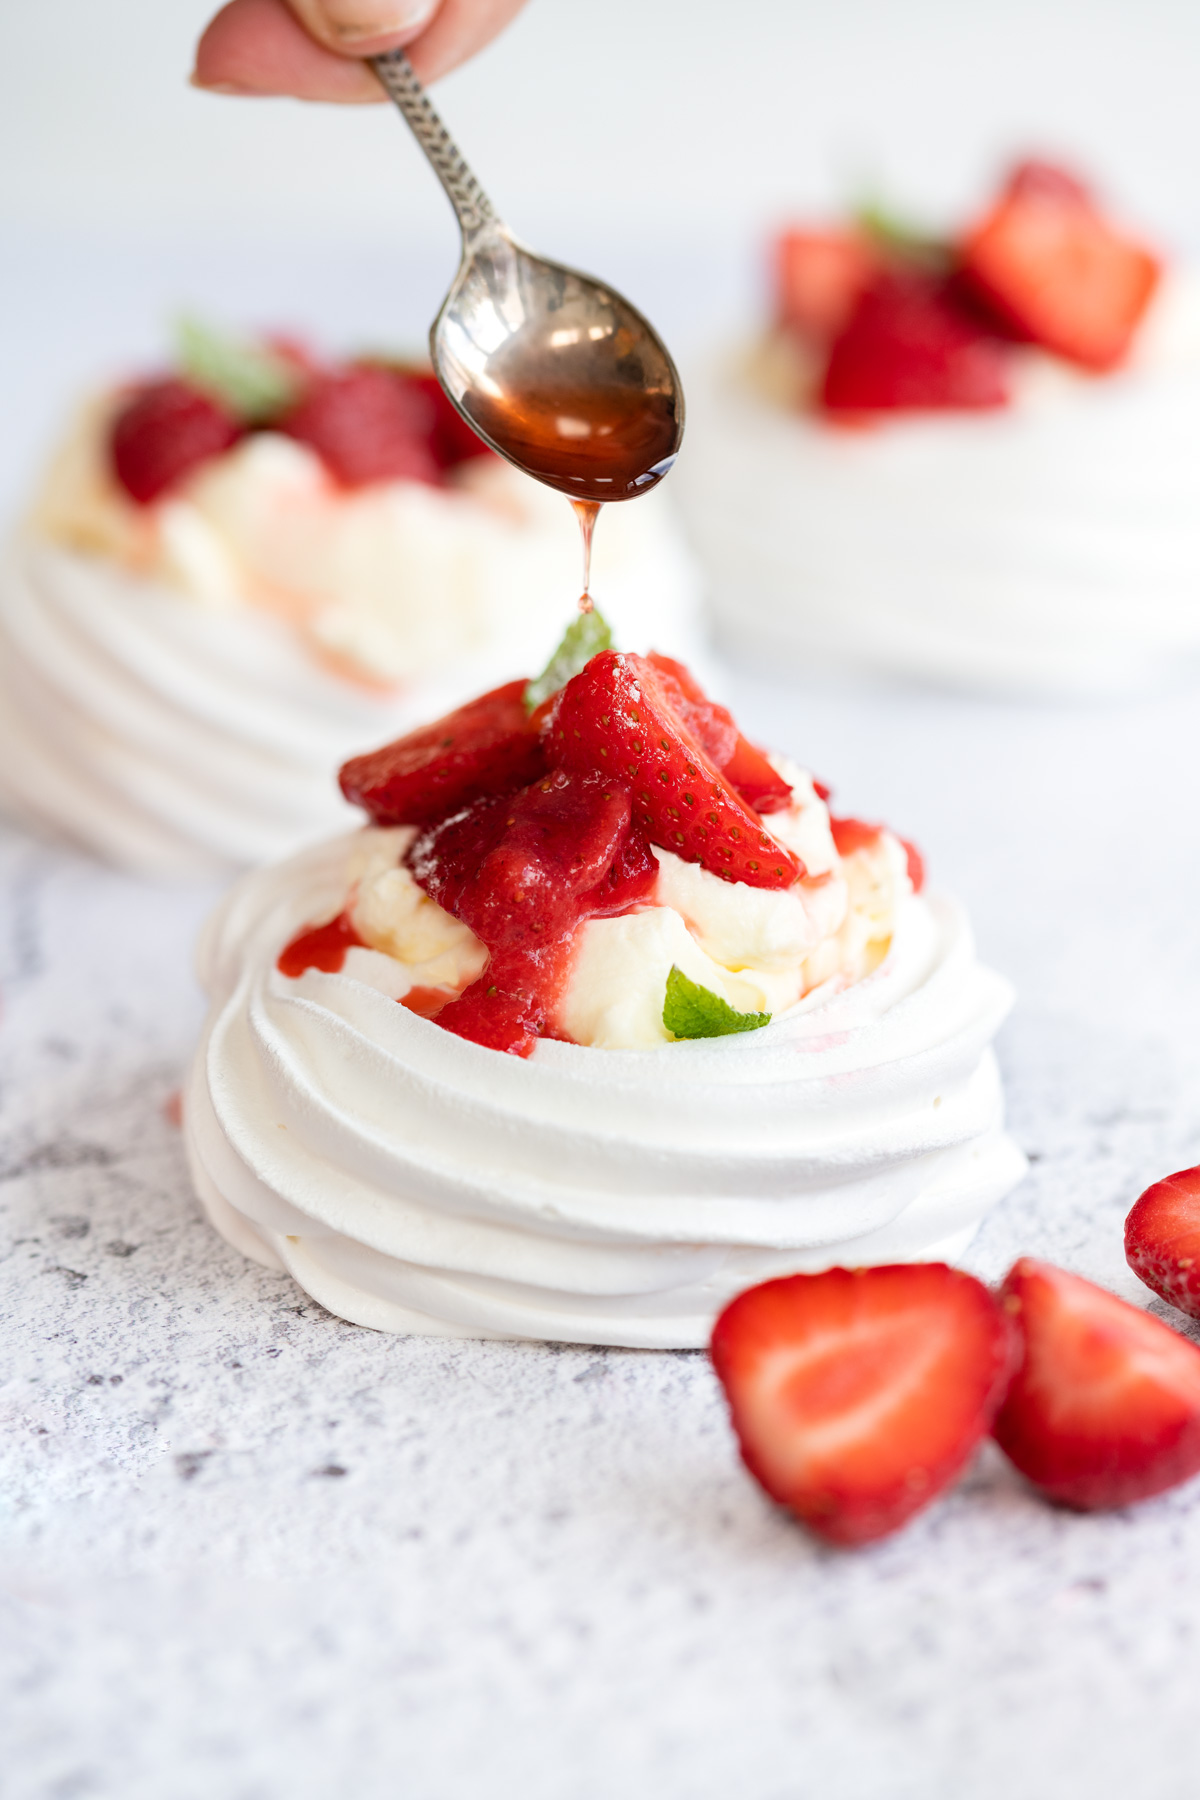 Mini pavlova filled with whipped cream and strawberries